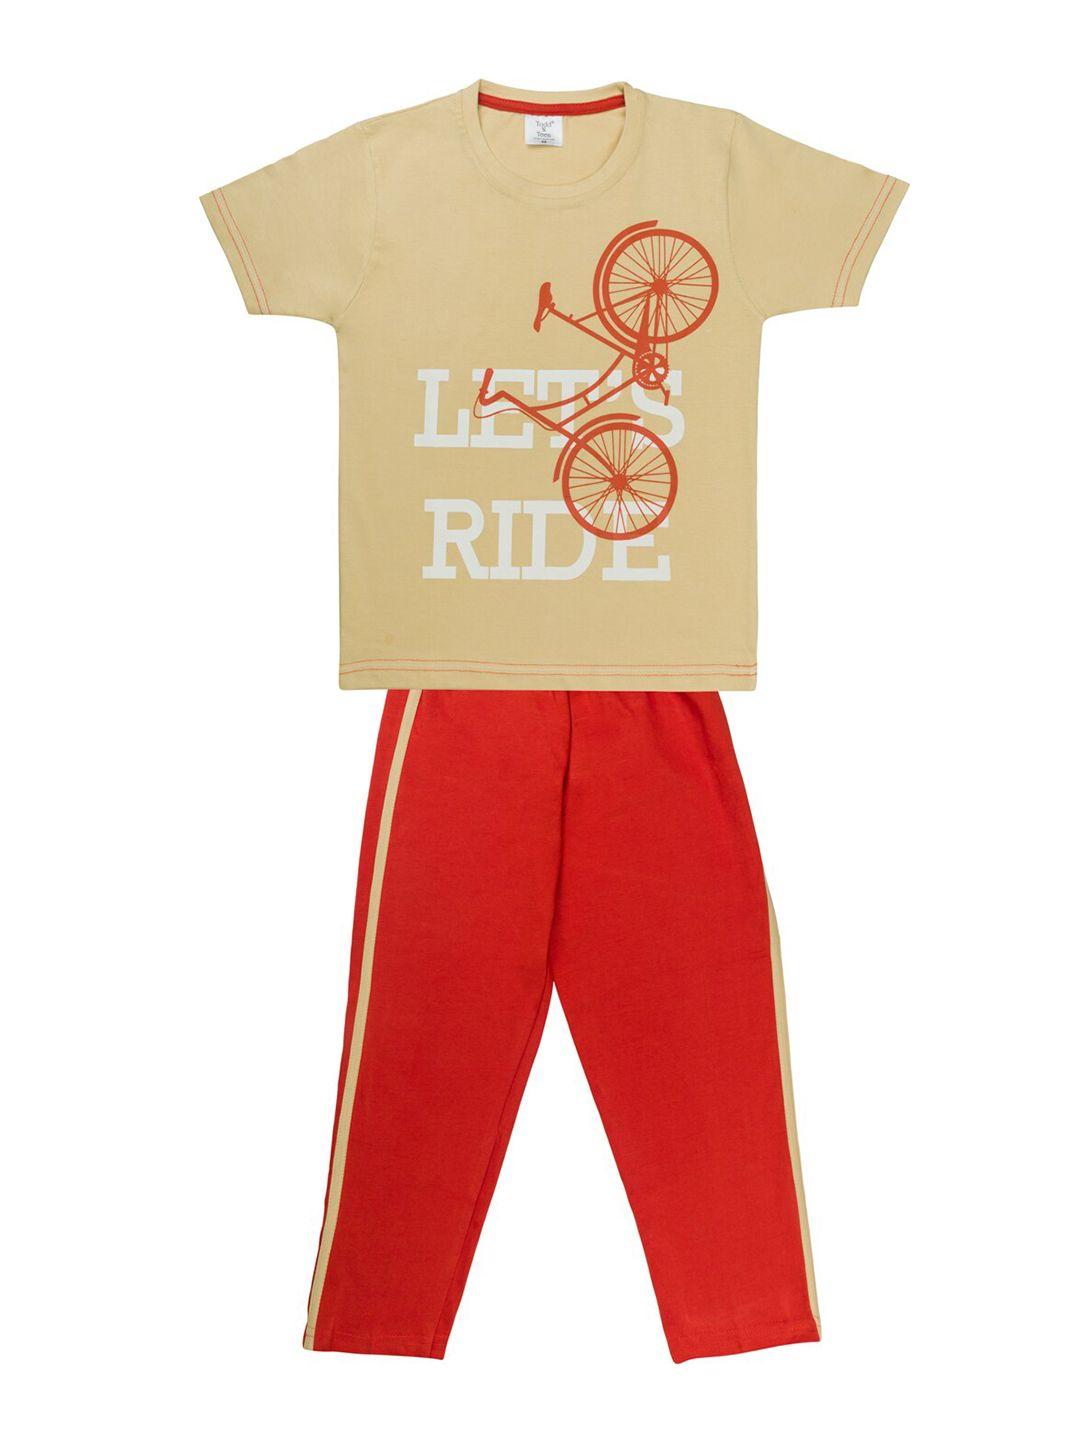 todd n teen boys camel brown & red printed cotton t-shirt with pyjamas